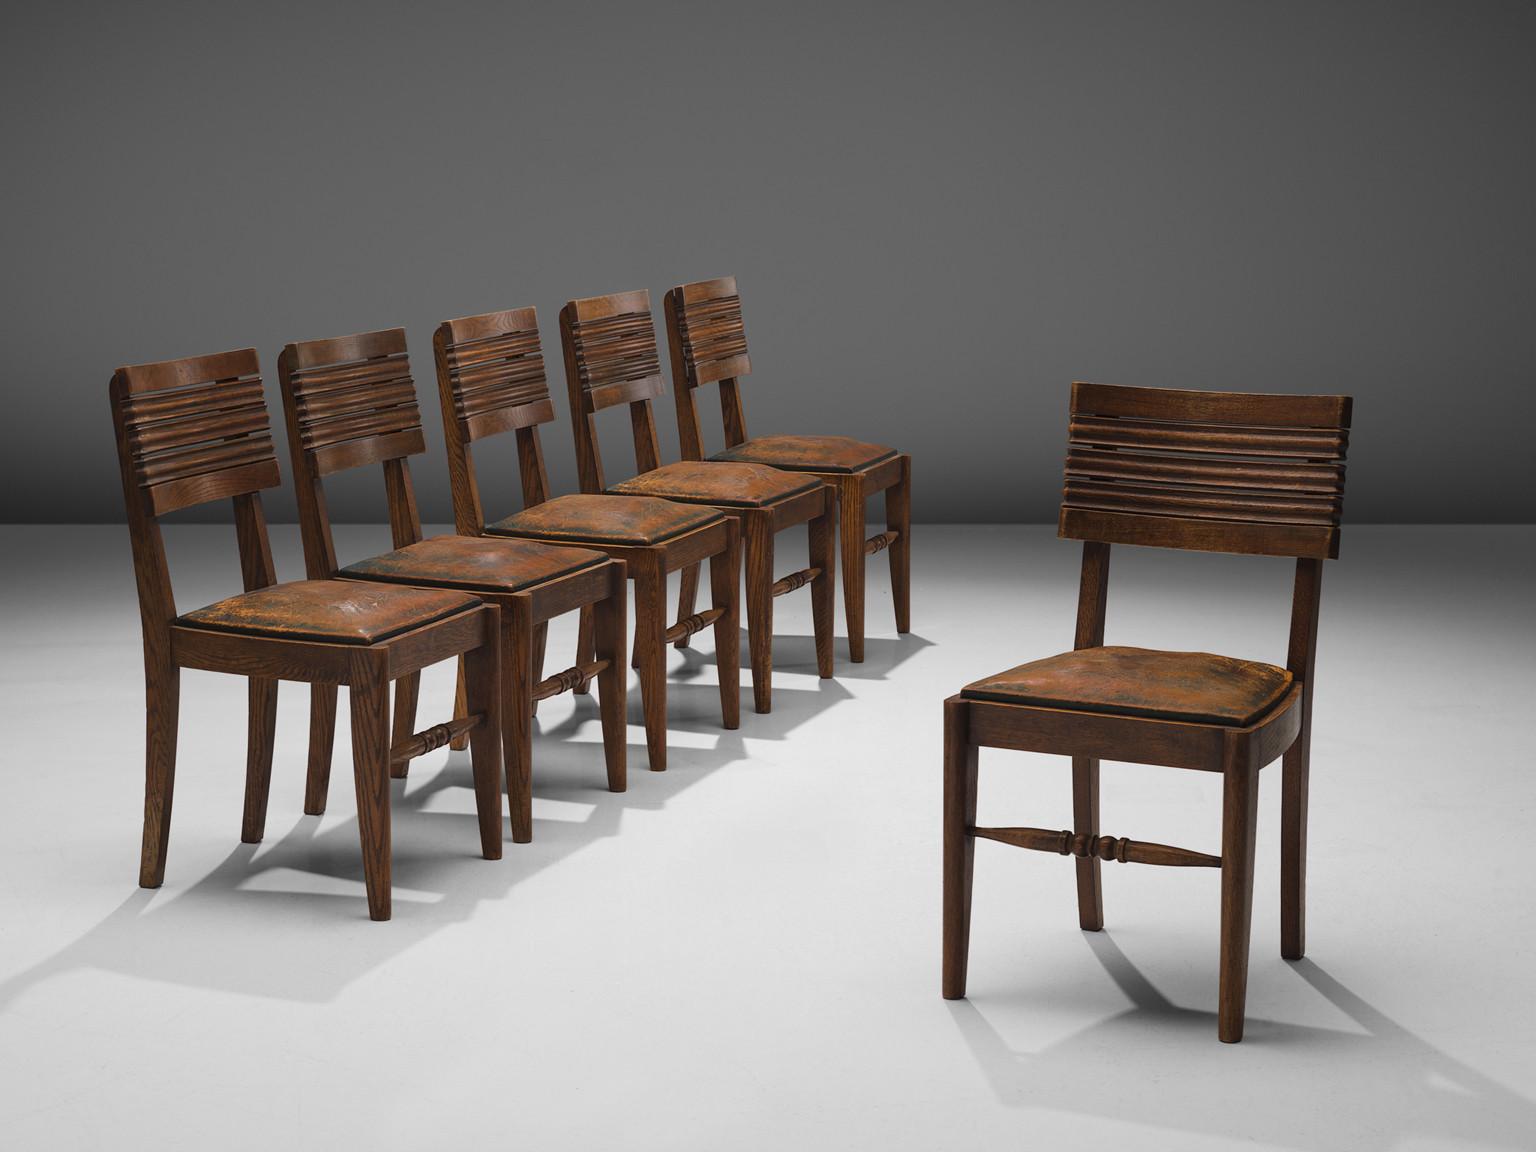 Gaston Poisson, set of six dining chairs, oak, leather, France, 1940s.

Dining chairs in solid oak, with beautiful detailed woodcarving and stunning patinated leather. The back of the chair consist of five slightly curved slats: top and bottom are